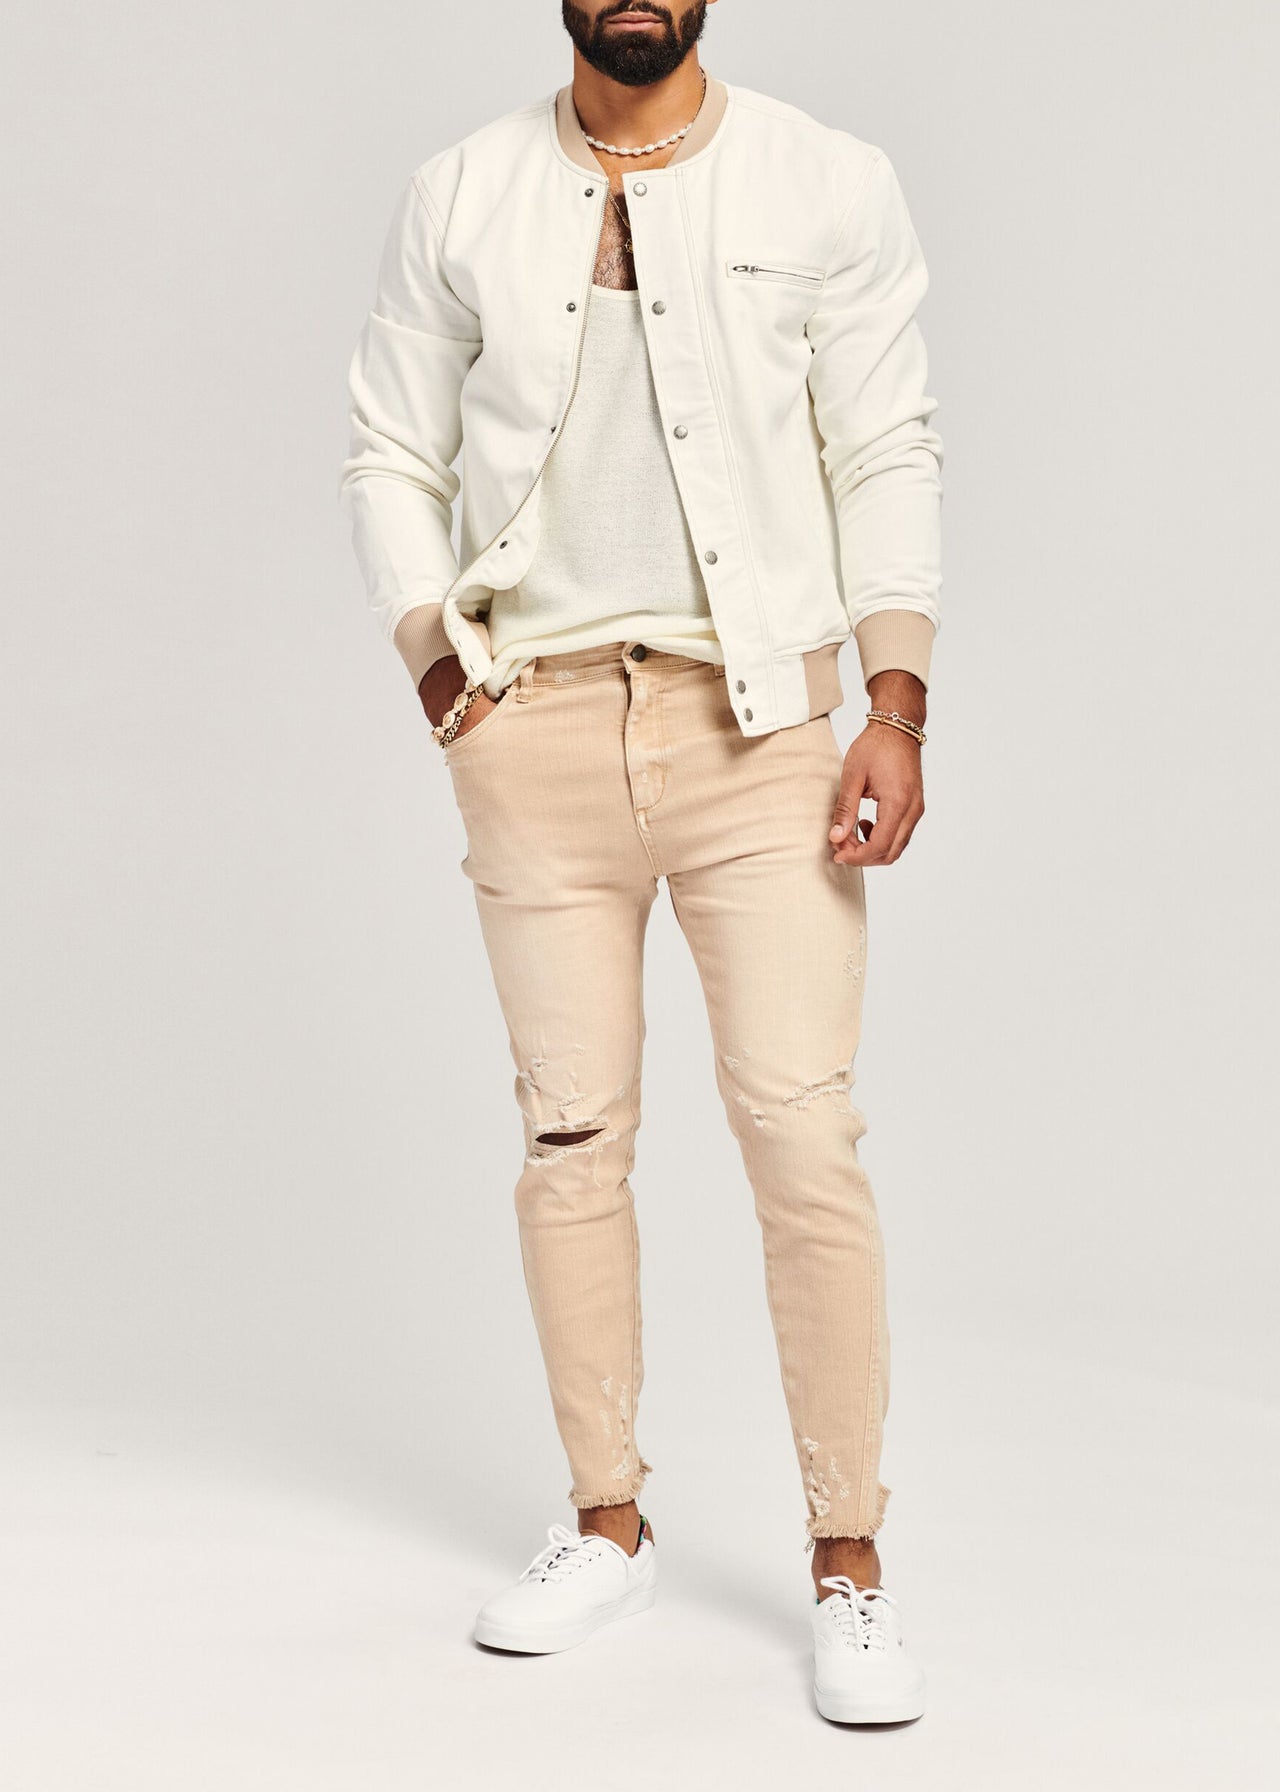 Diego SEROYA – Tapered NYC Cropped Jean